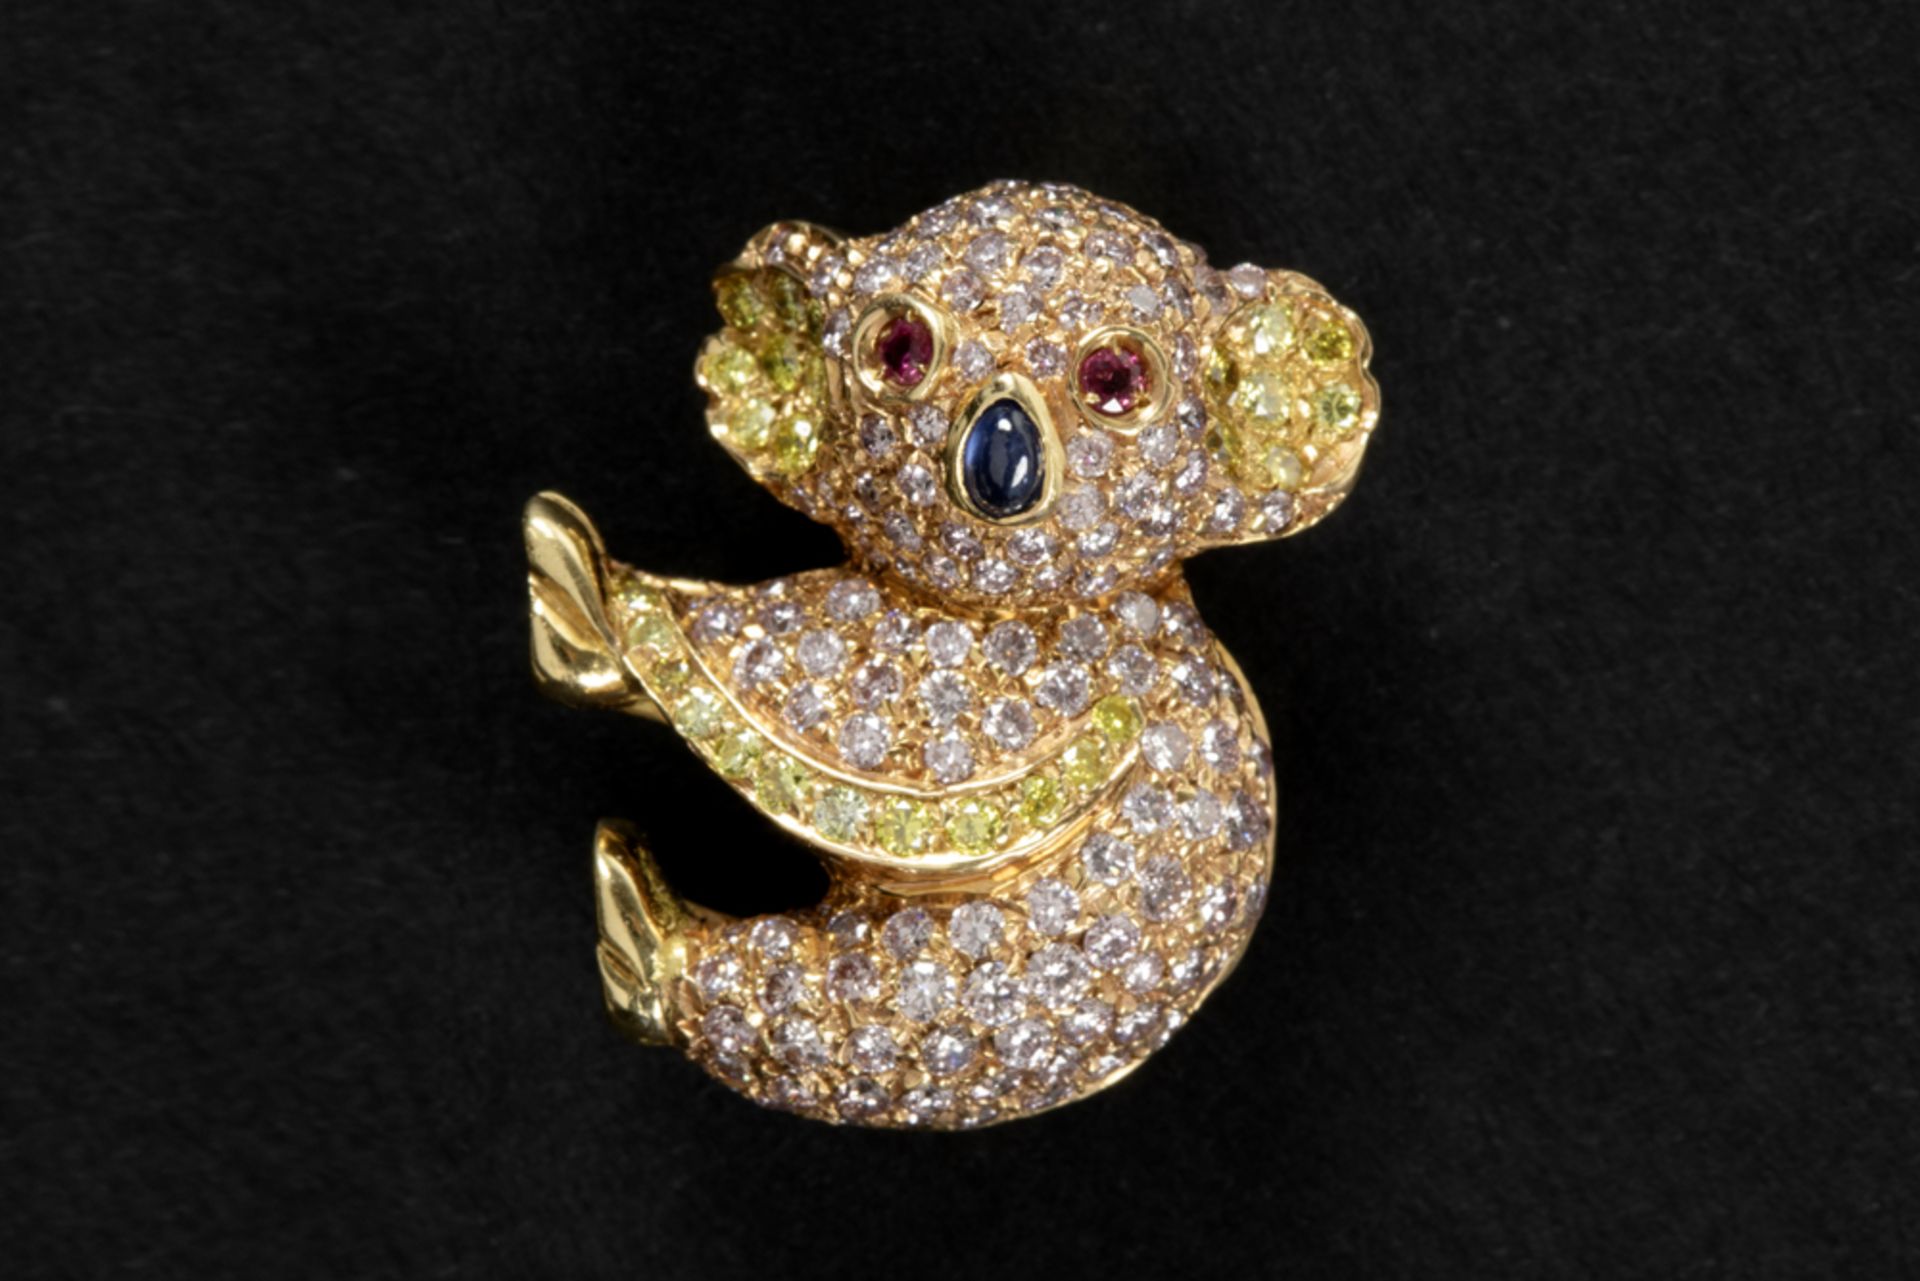 nineties' cute "Koala" brooch in pink, yellow and white gold (18 carat) with ruby (eyes),